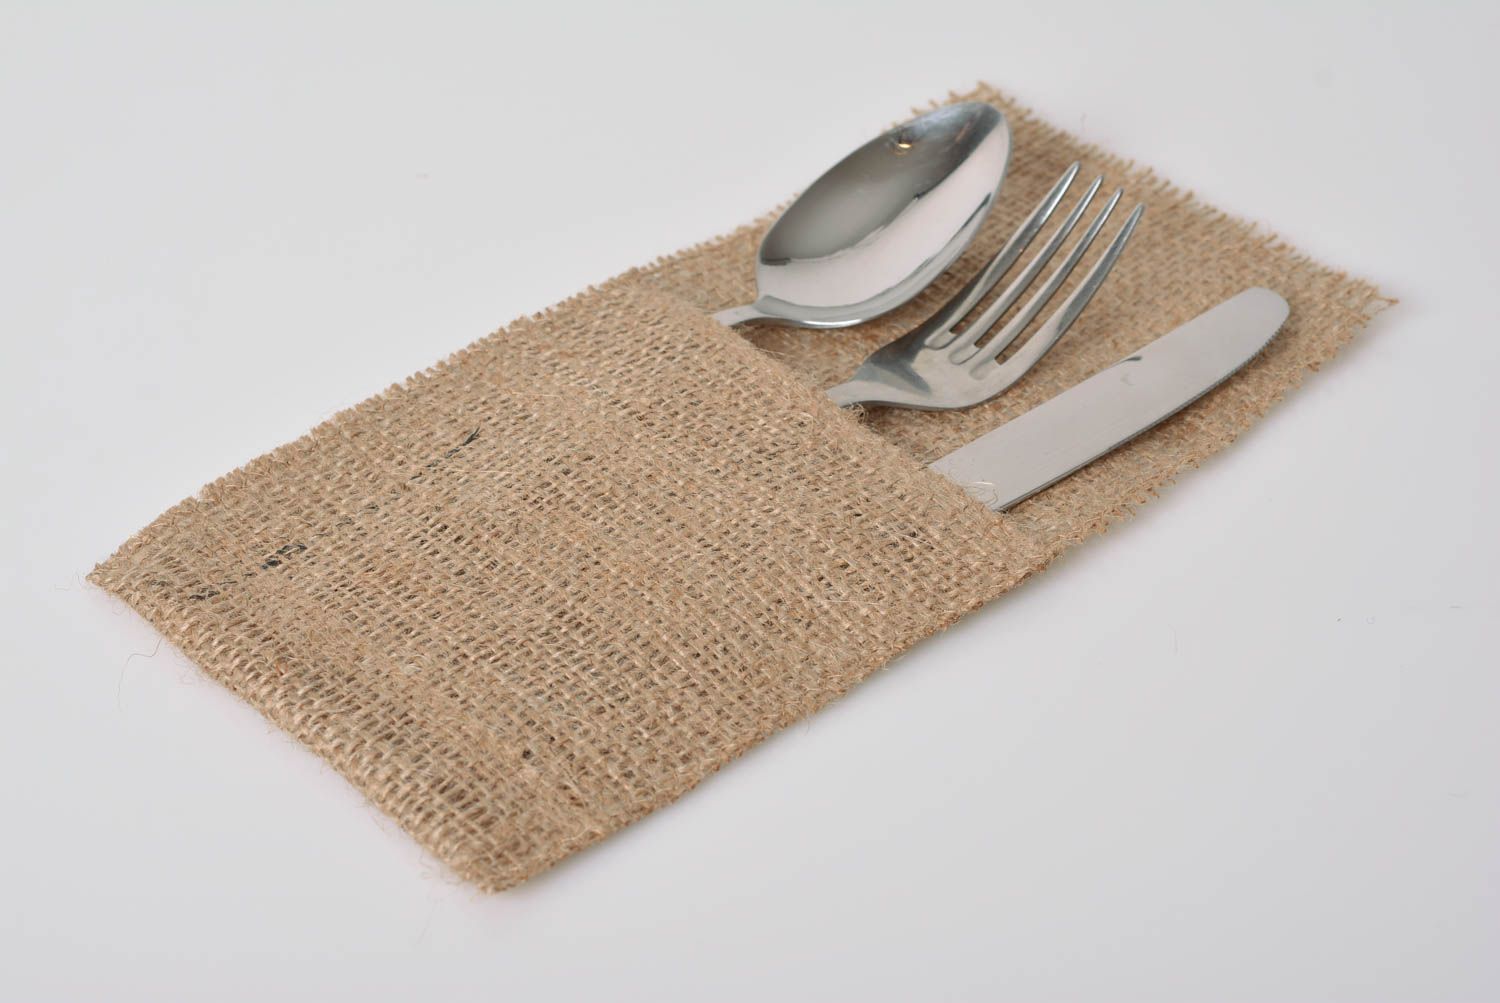 Case for cutlery made of burlap handmade decorative kitchen accessory photo 2